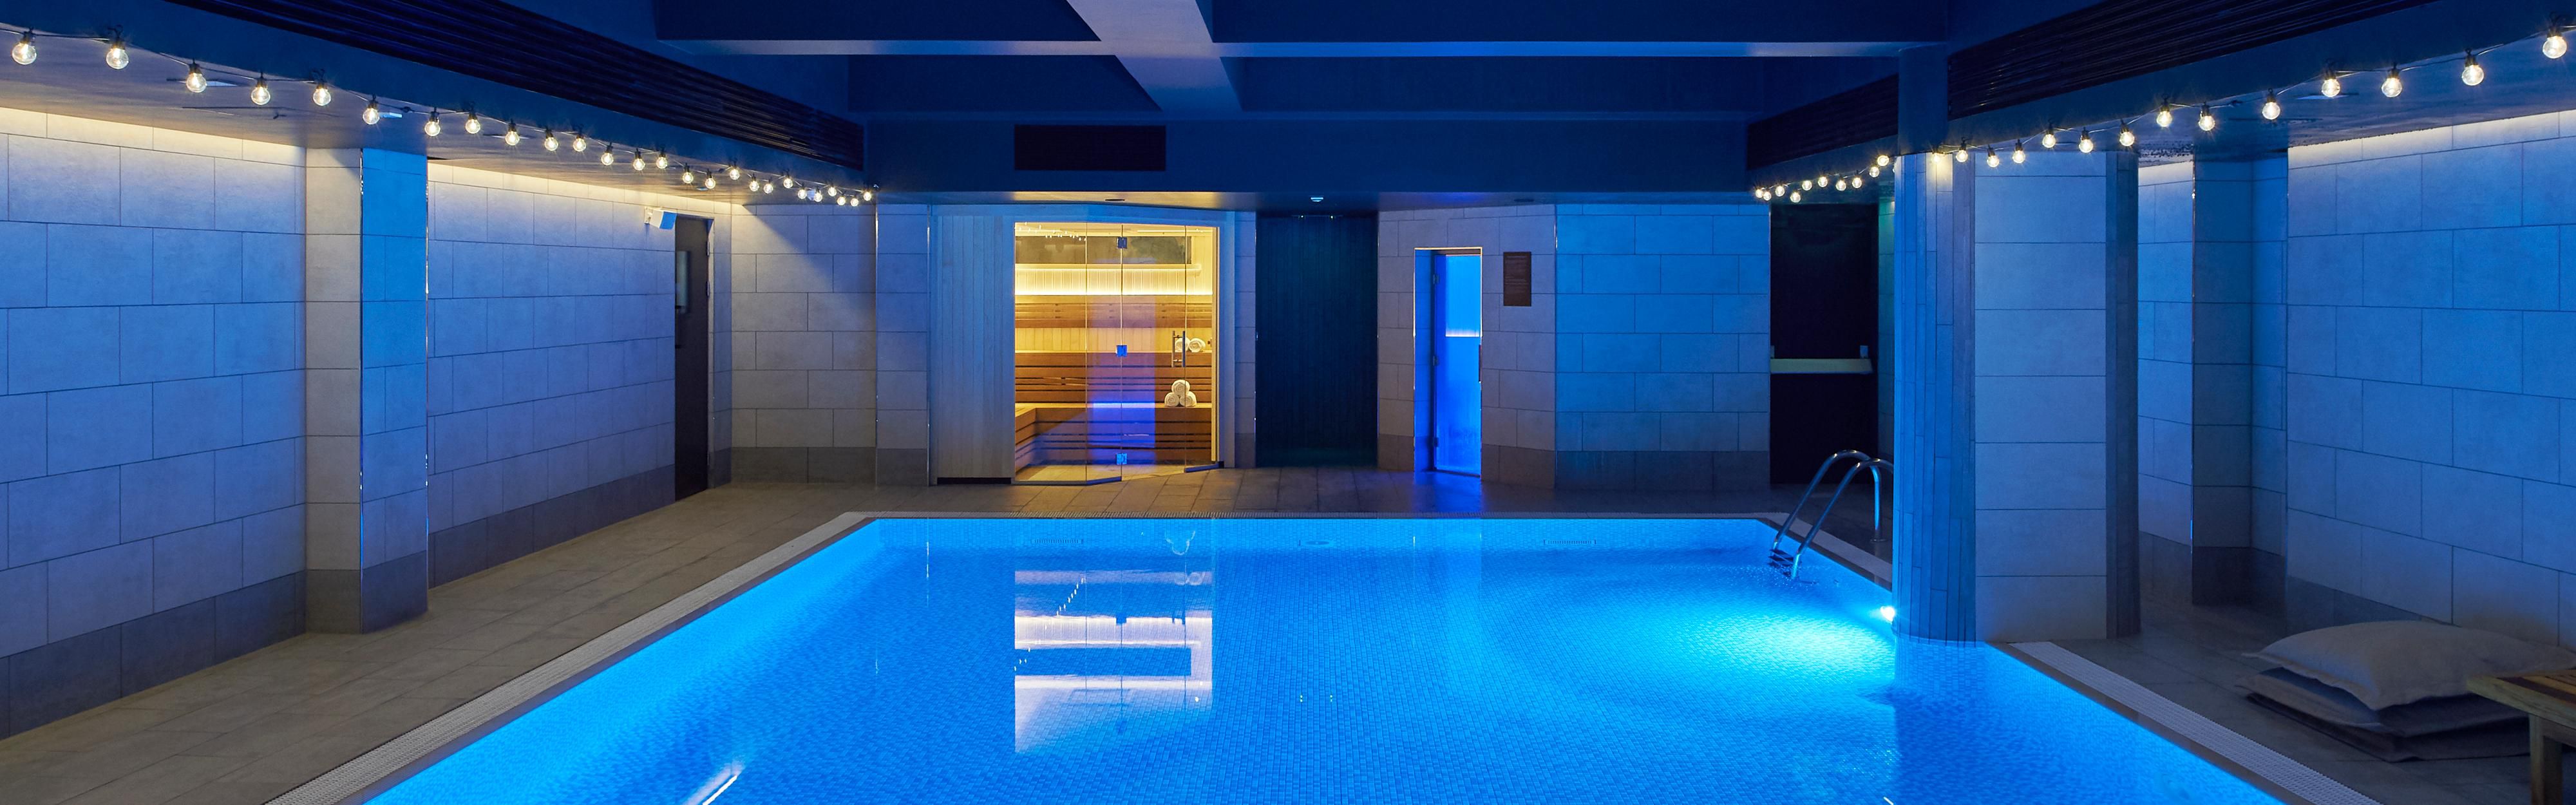 Spend your morning workouts in our 12 meter mood-lit pool